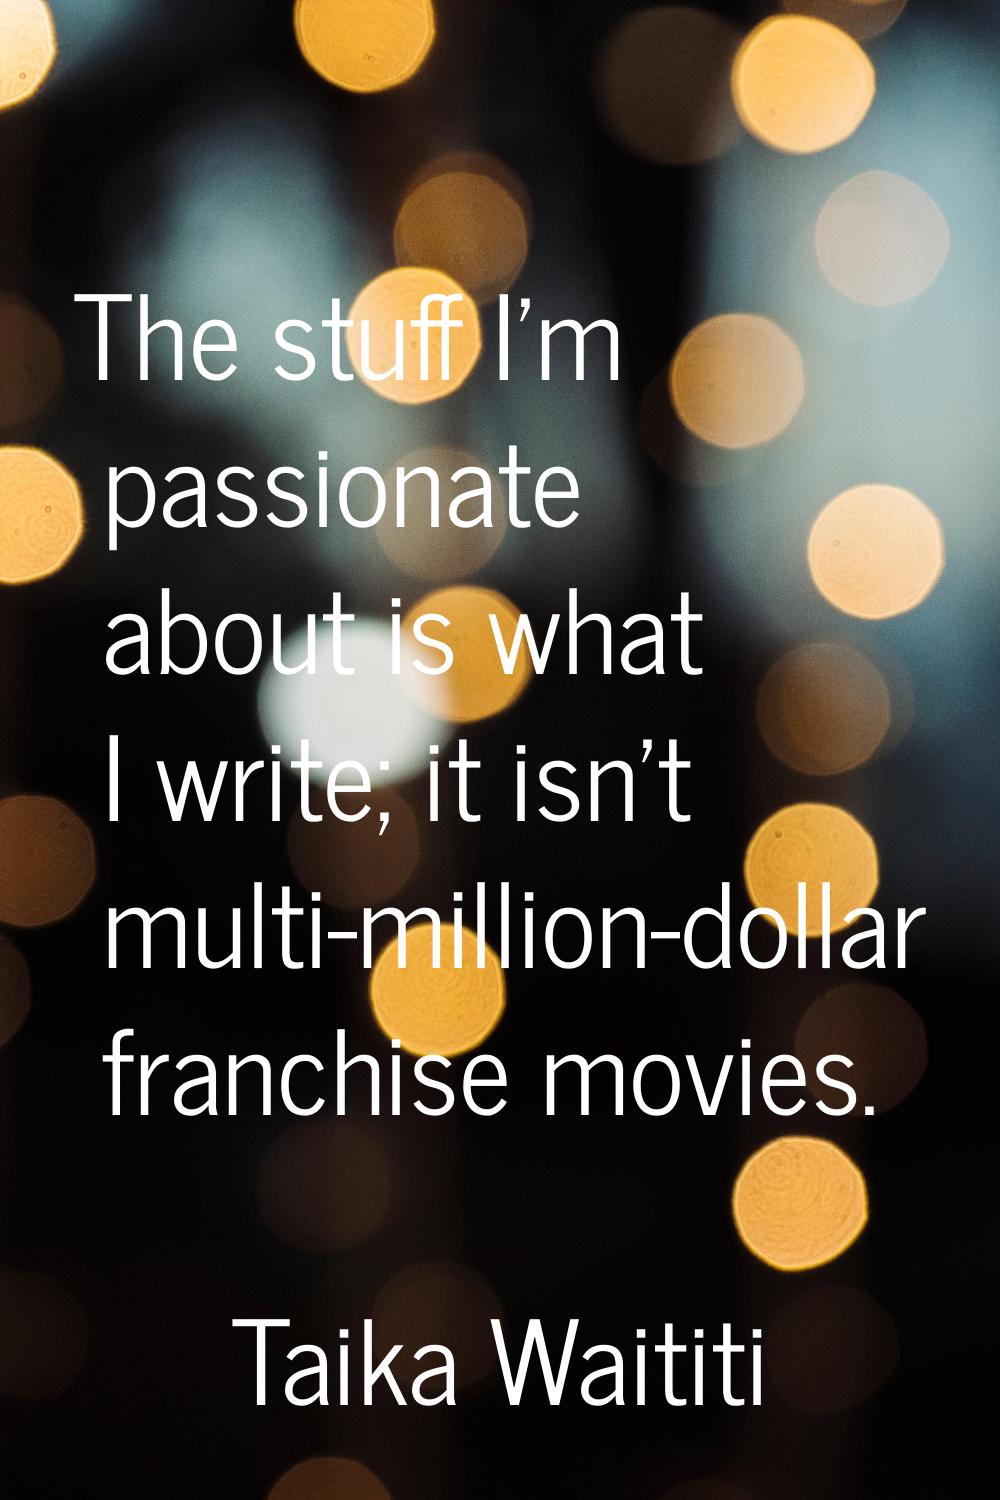 The stuff I'm passionate about is what I write; it isn't multi-million-dollar franchise movies.